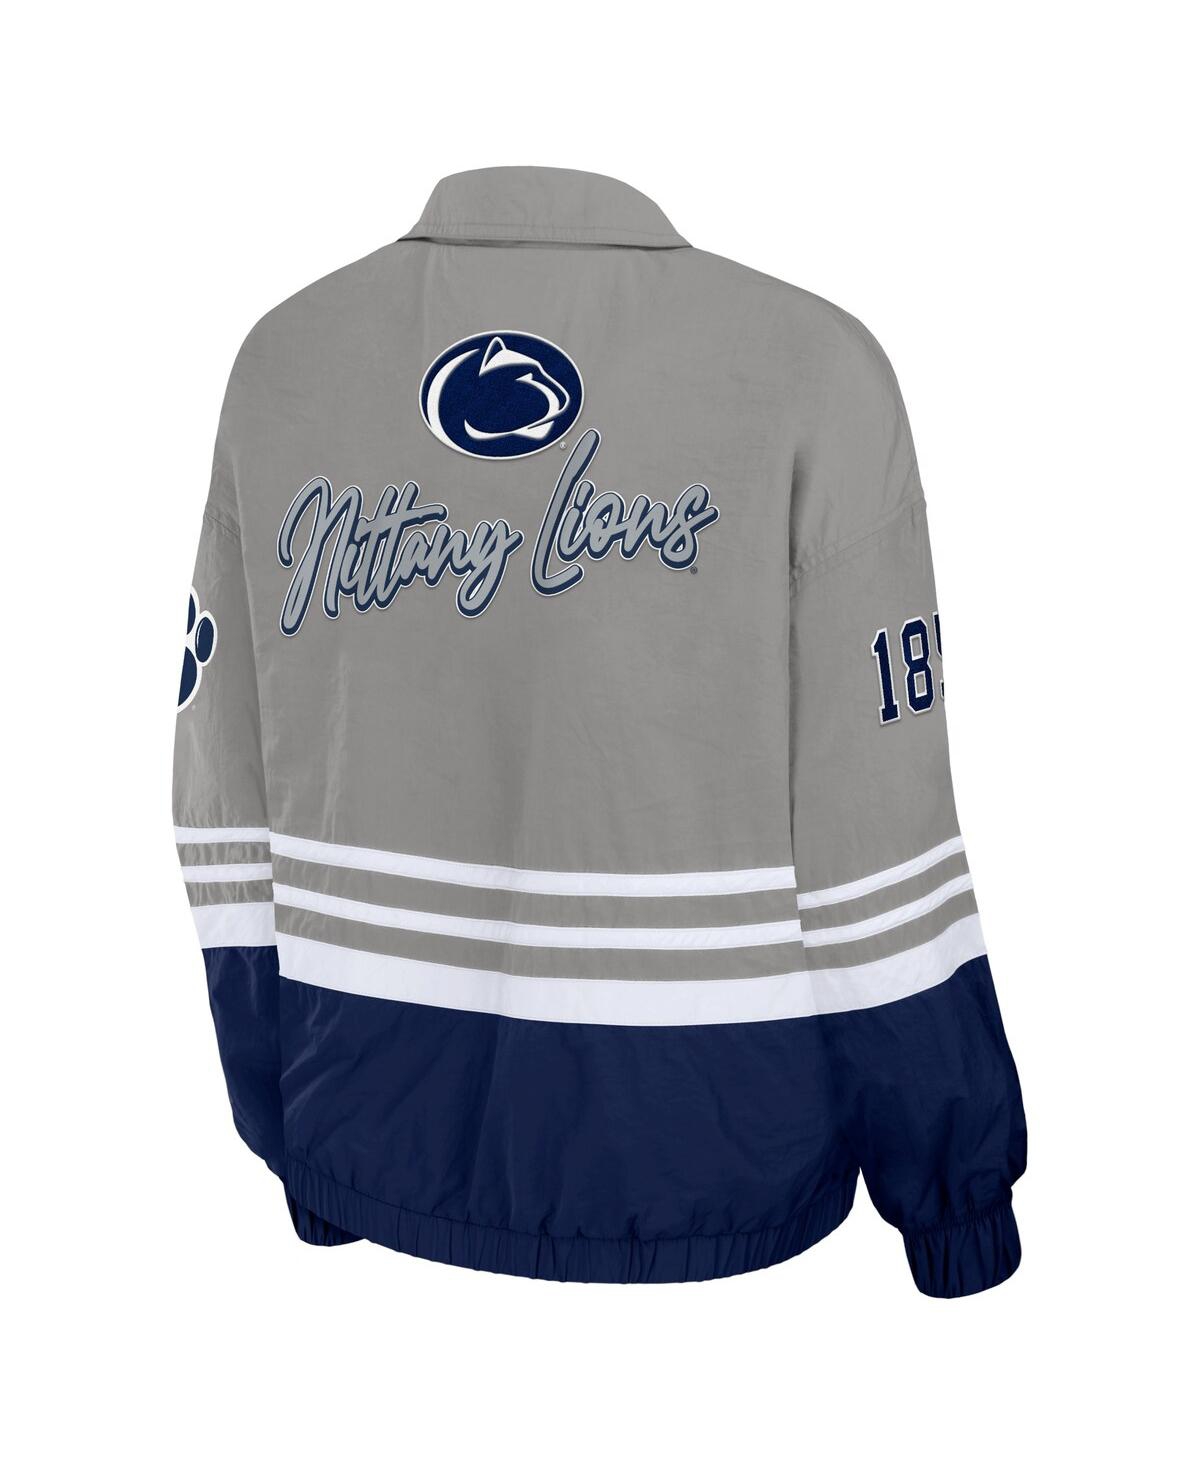 Shop Wear By Erin Andrews Women's  Gray Distressed Penn State Nittany Lions Vintage-like Throwback Windbre